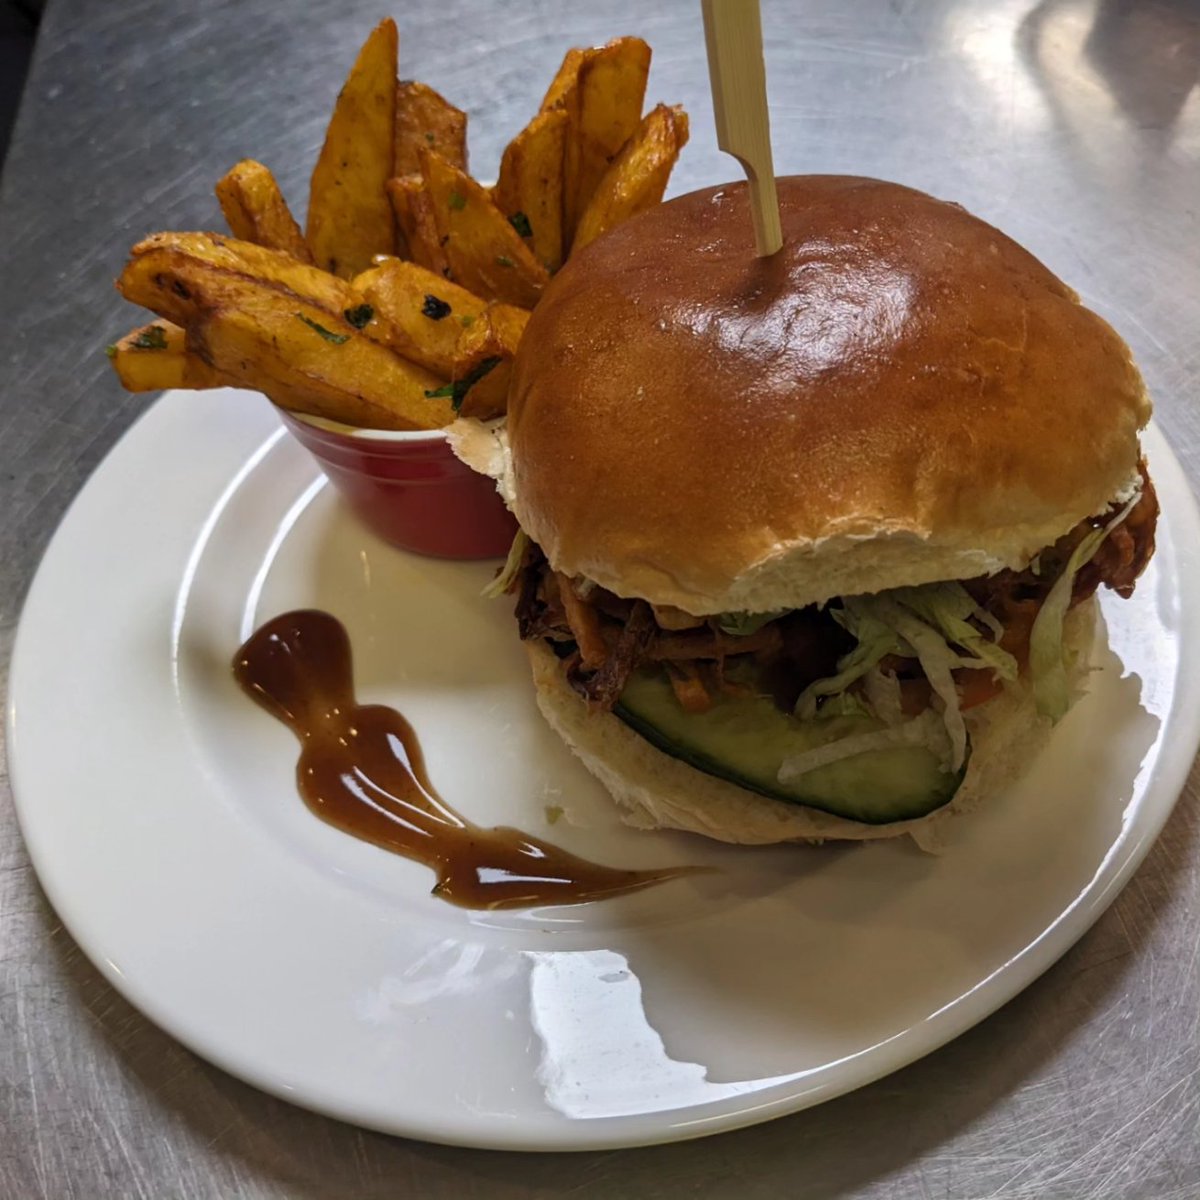 It's the weekend! Come to @richmixlondon and chill with a snack, Pakora (Potato & Onion GF / Vegan/ Vegetarian) with Tamarind sauce. Want something more? Have a Pakora slider with salad or without the bun. You can pre order your food at the #CinemaBar.